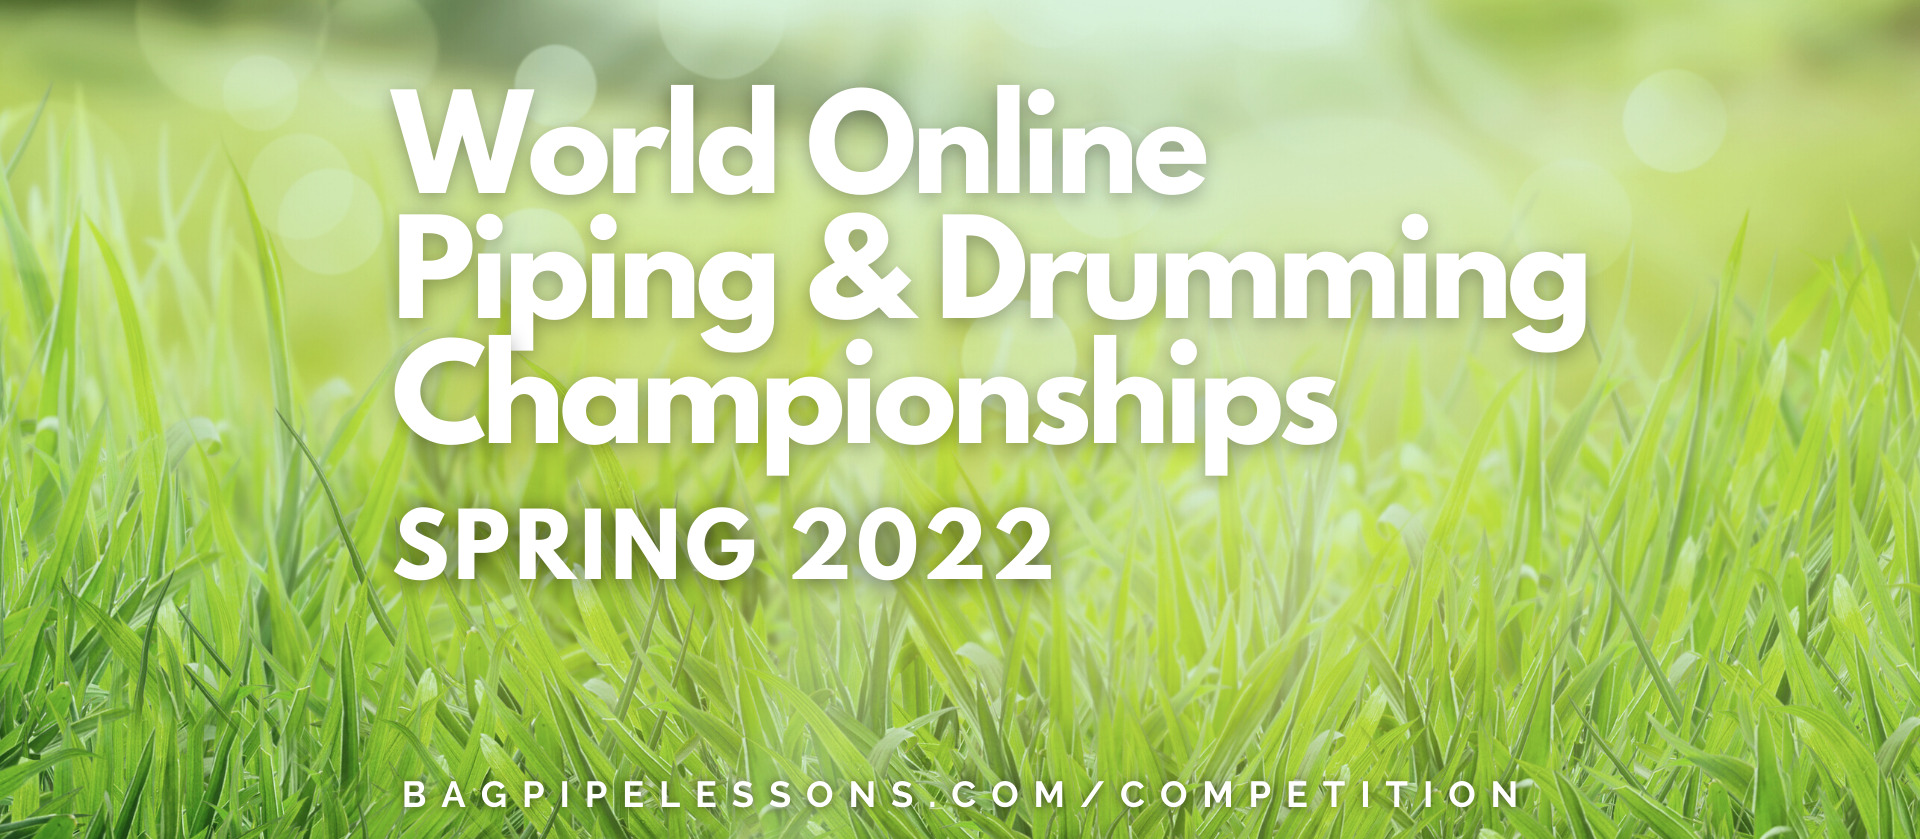 The World Online Piping & Drumming Championships Return for 2022